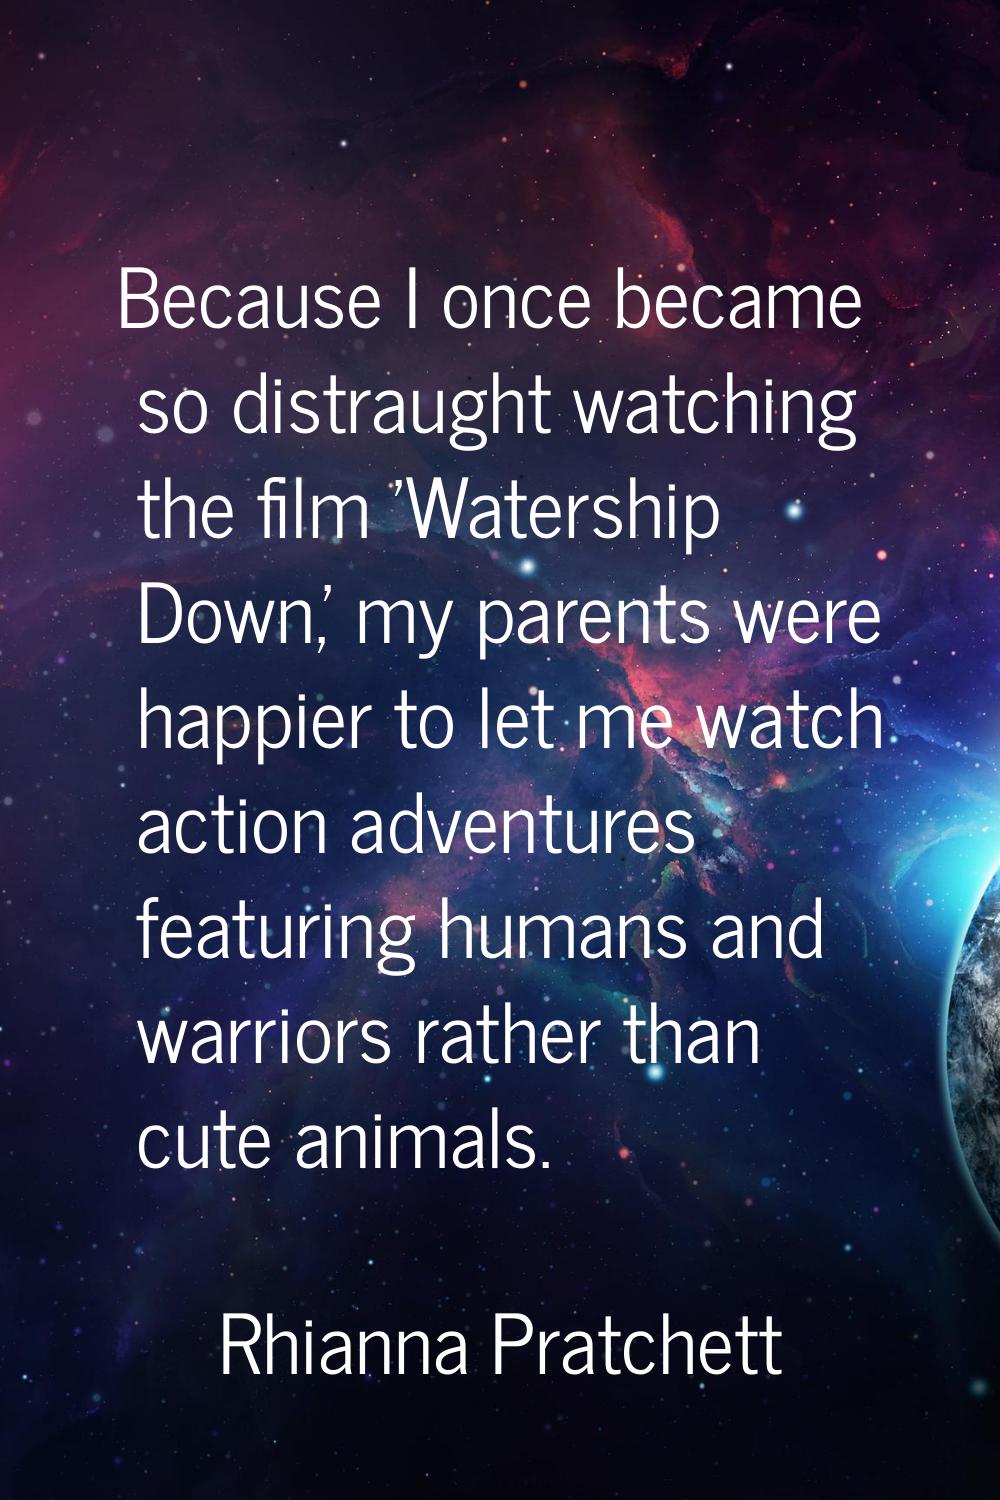 Because I once became so distraught watching the film 'Watership Down,' my parents were happier to 